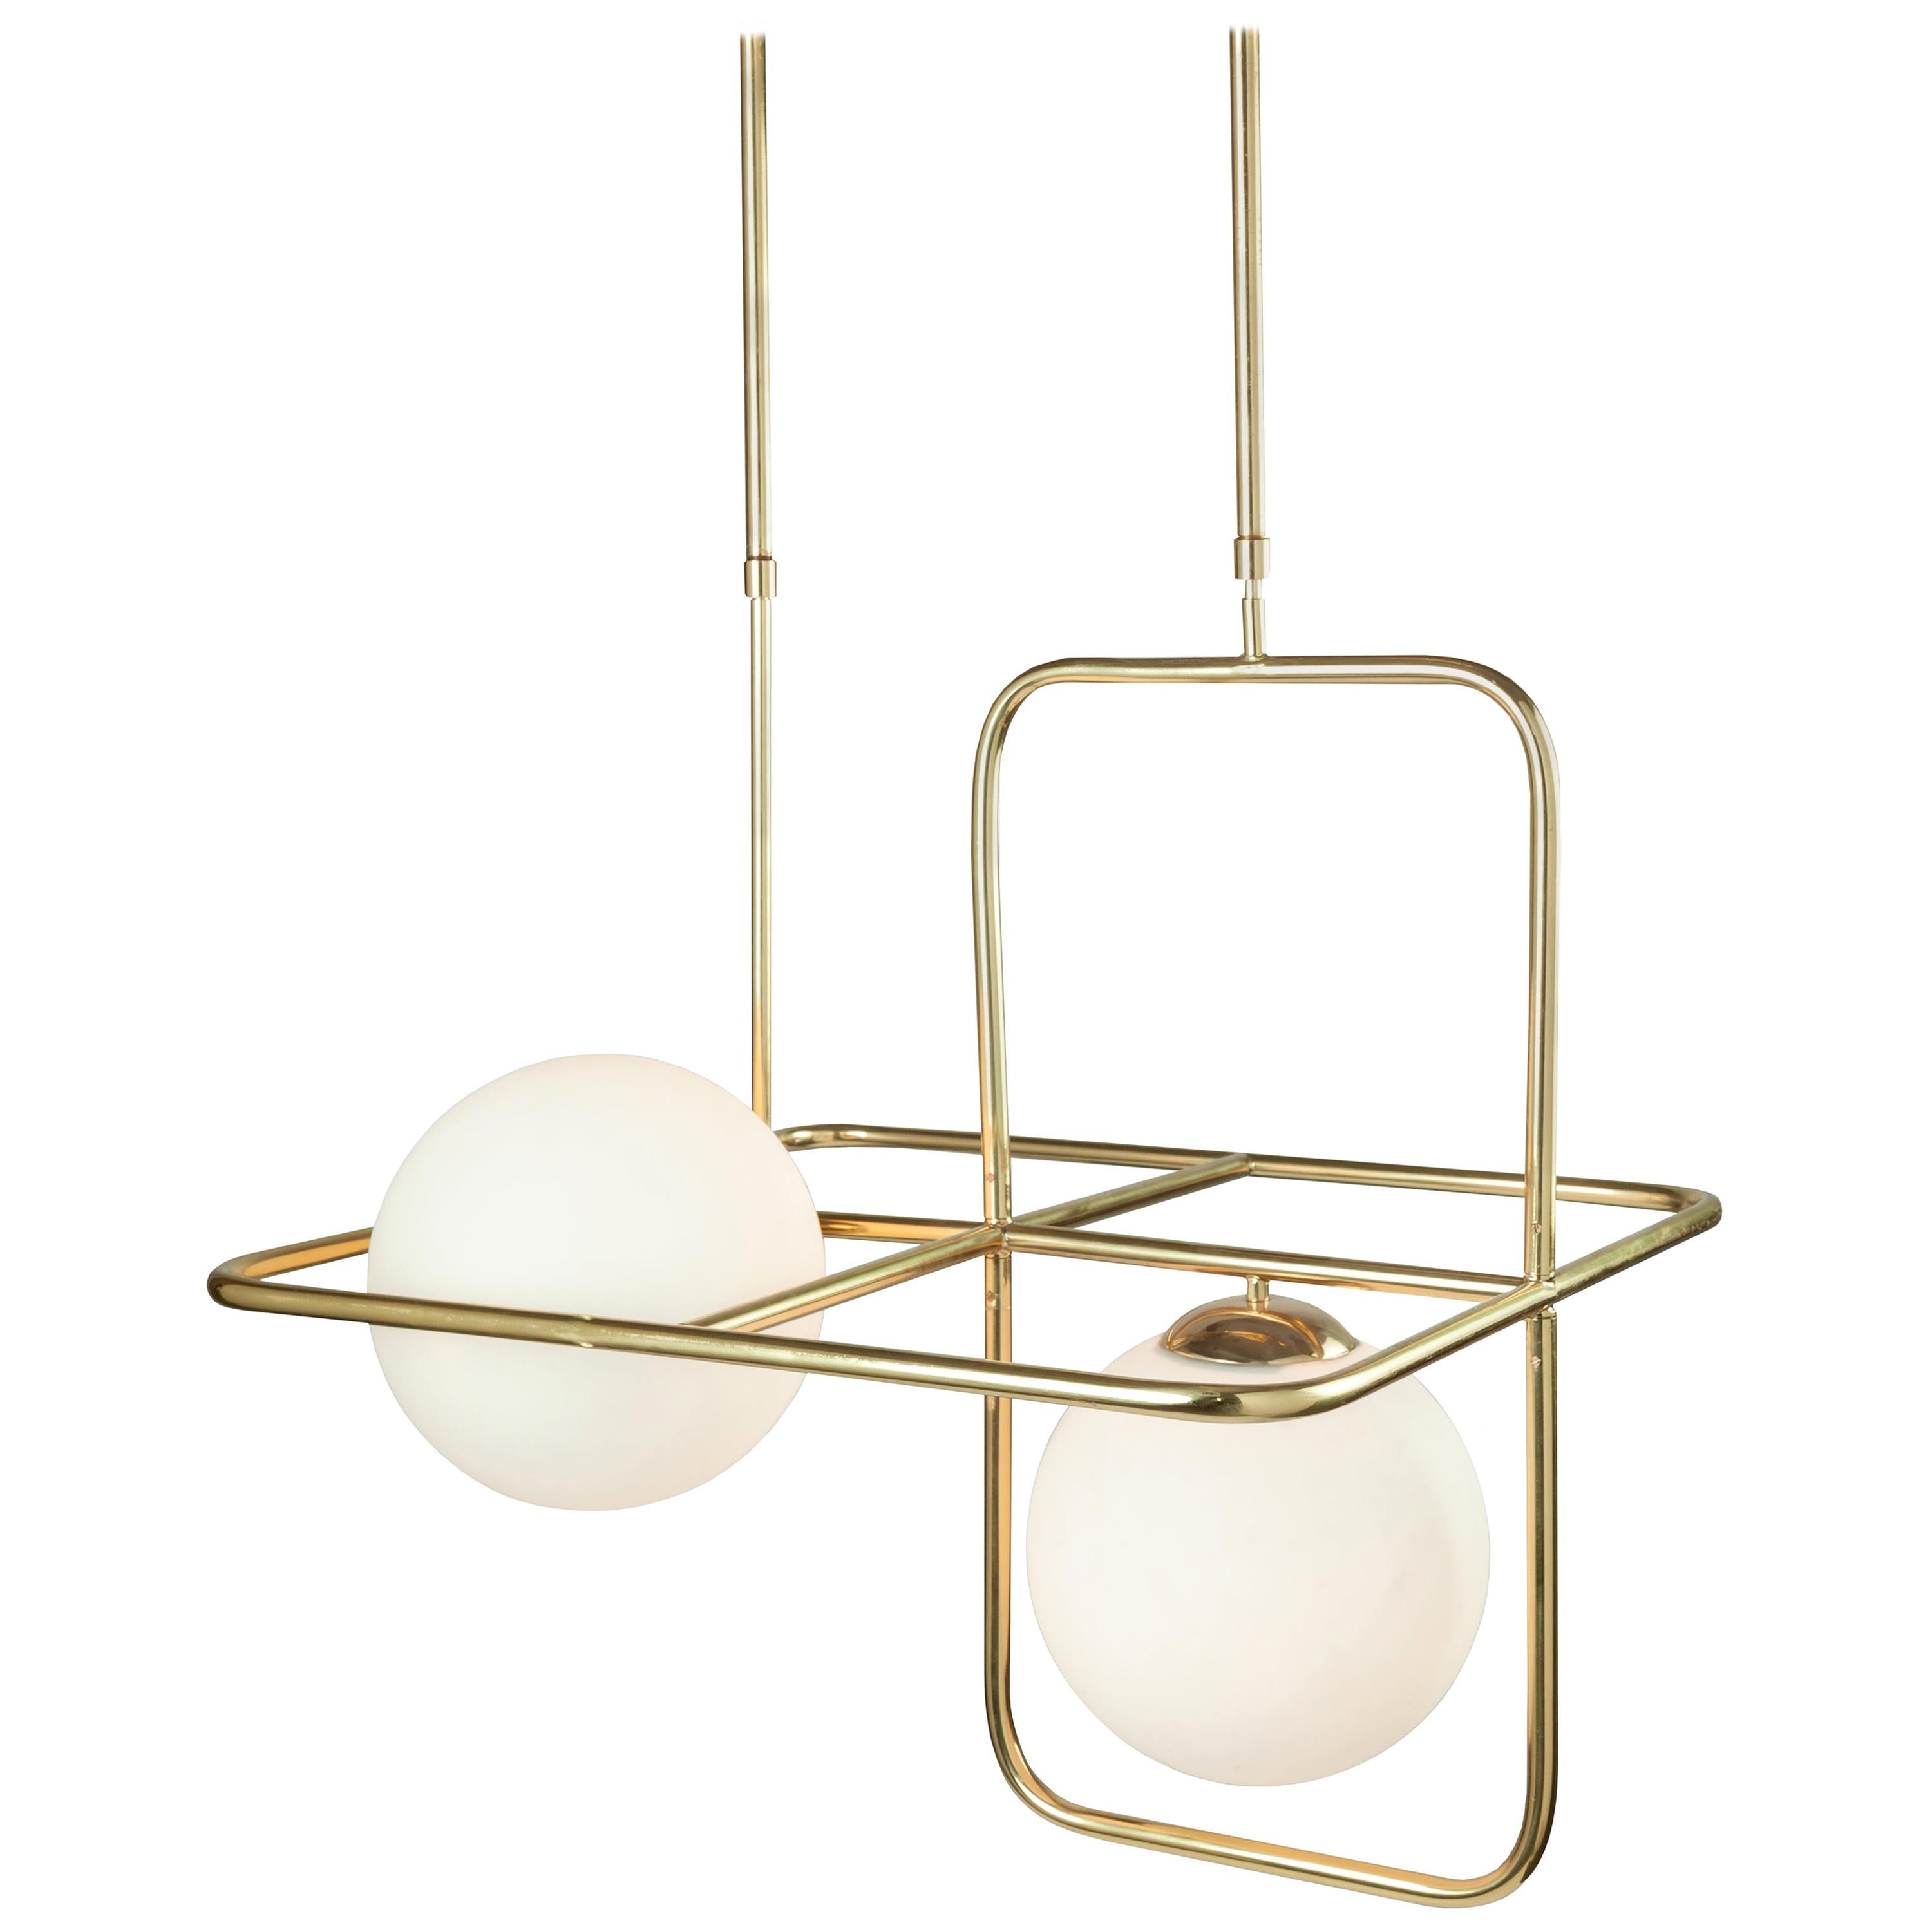 Contemporary Mid-Century Modern Link III Pendant Lamp Polished Brass